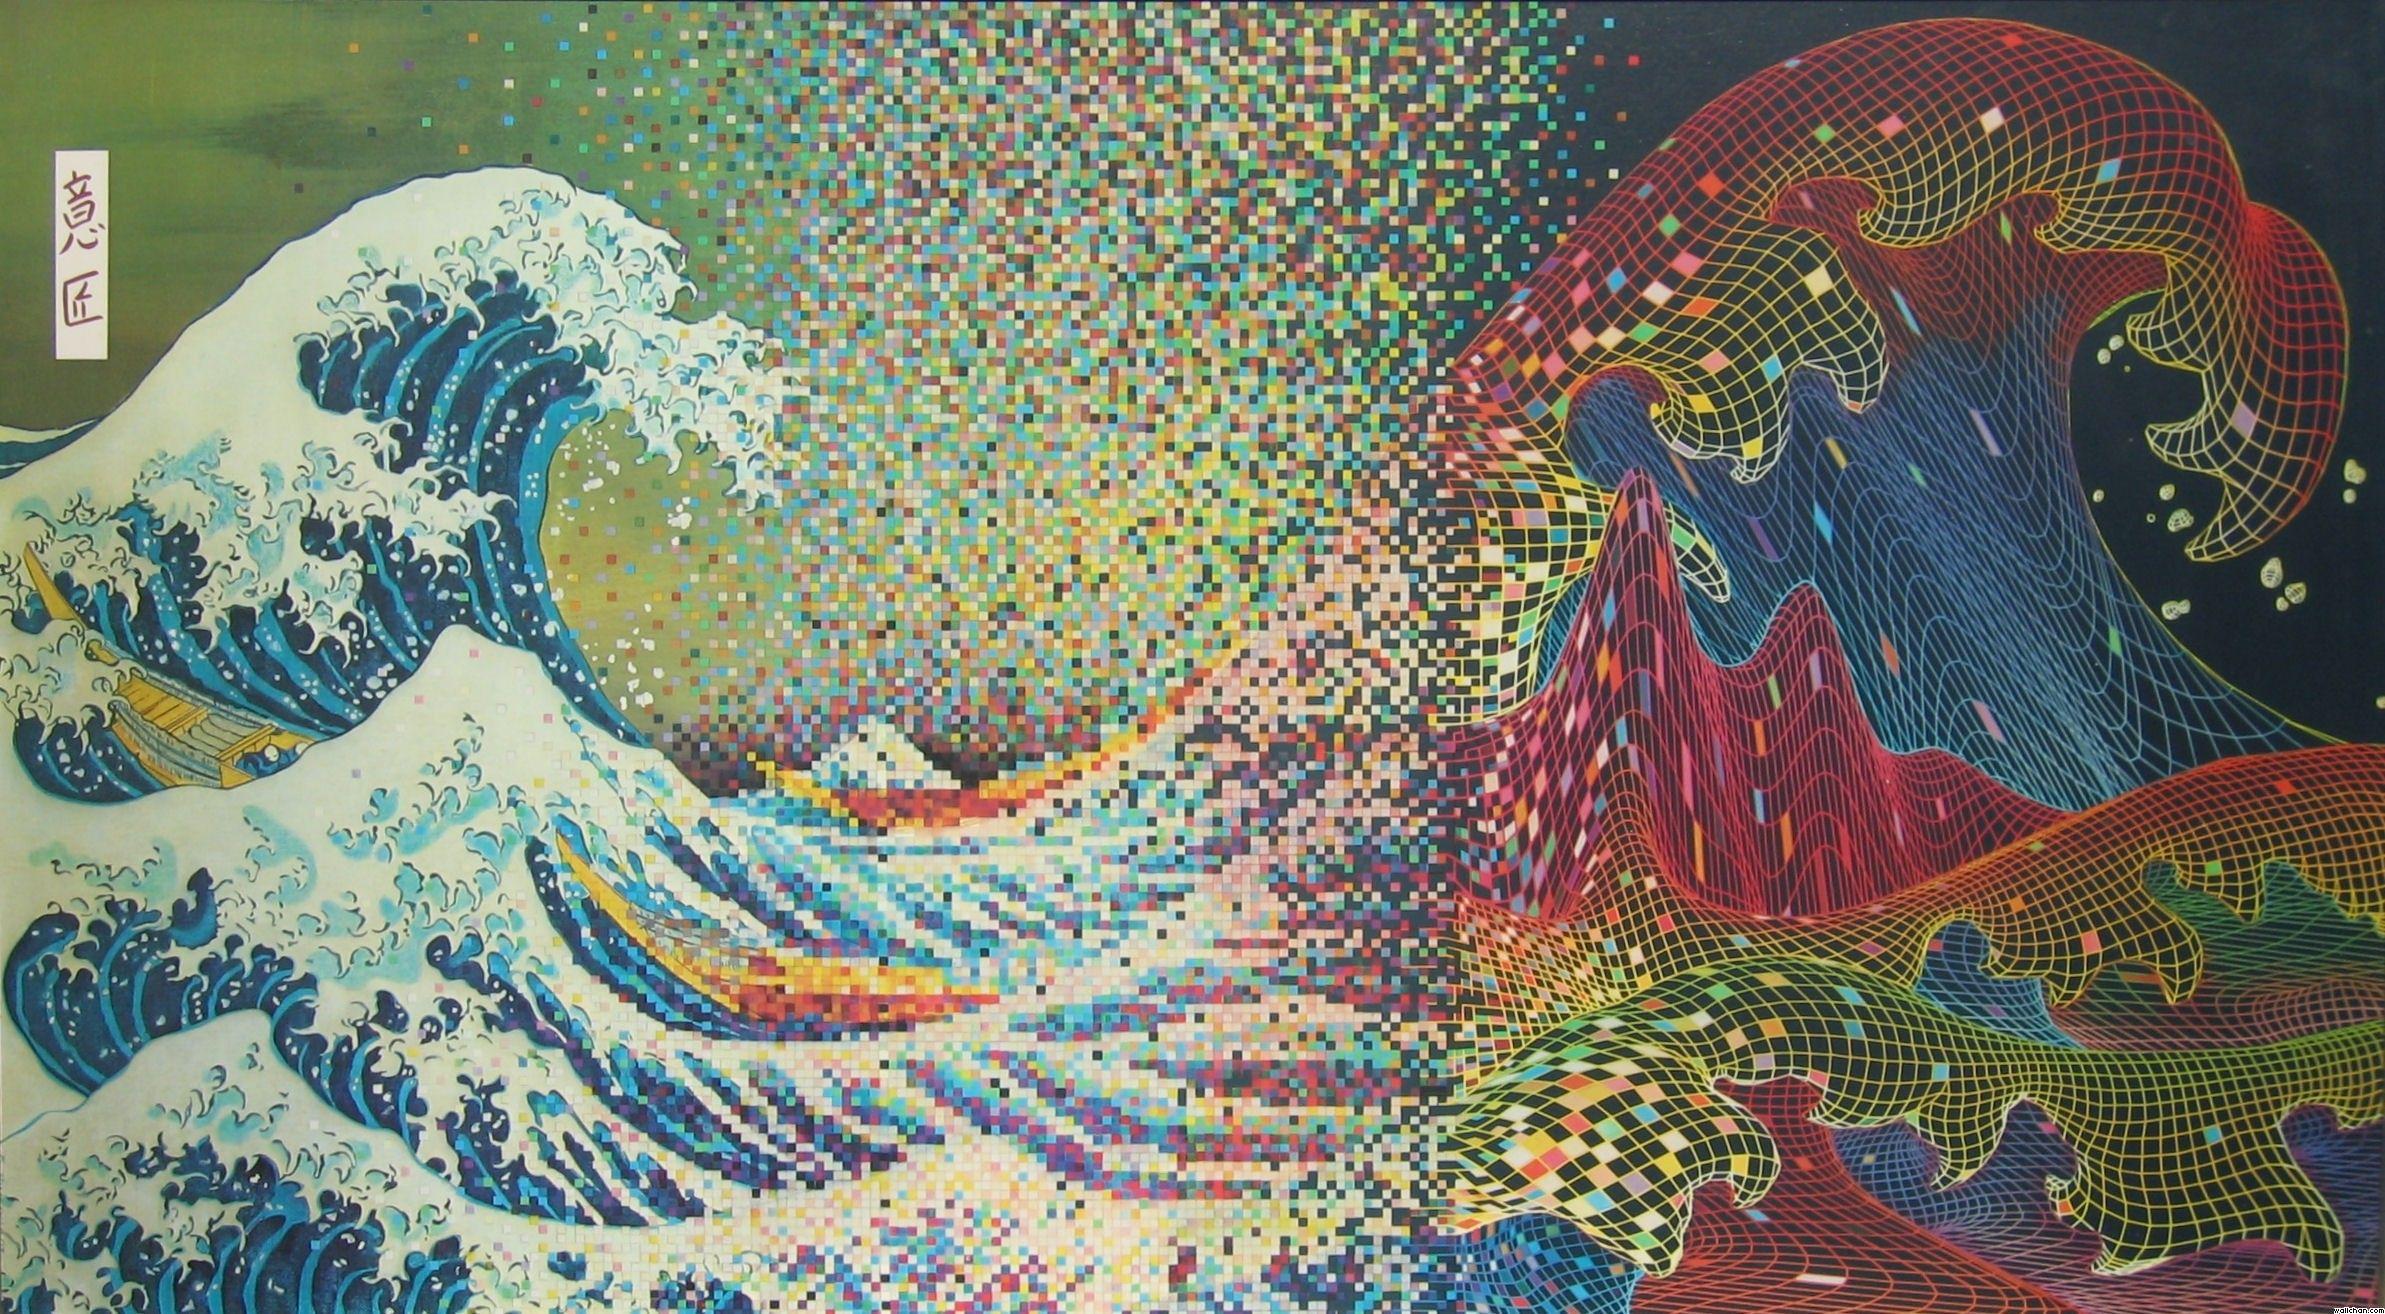 waves, vectors, rainbows, artwork, pixelated, The Great Wave off